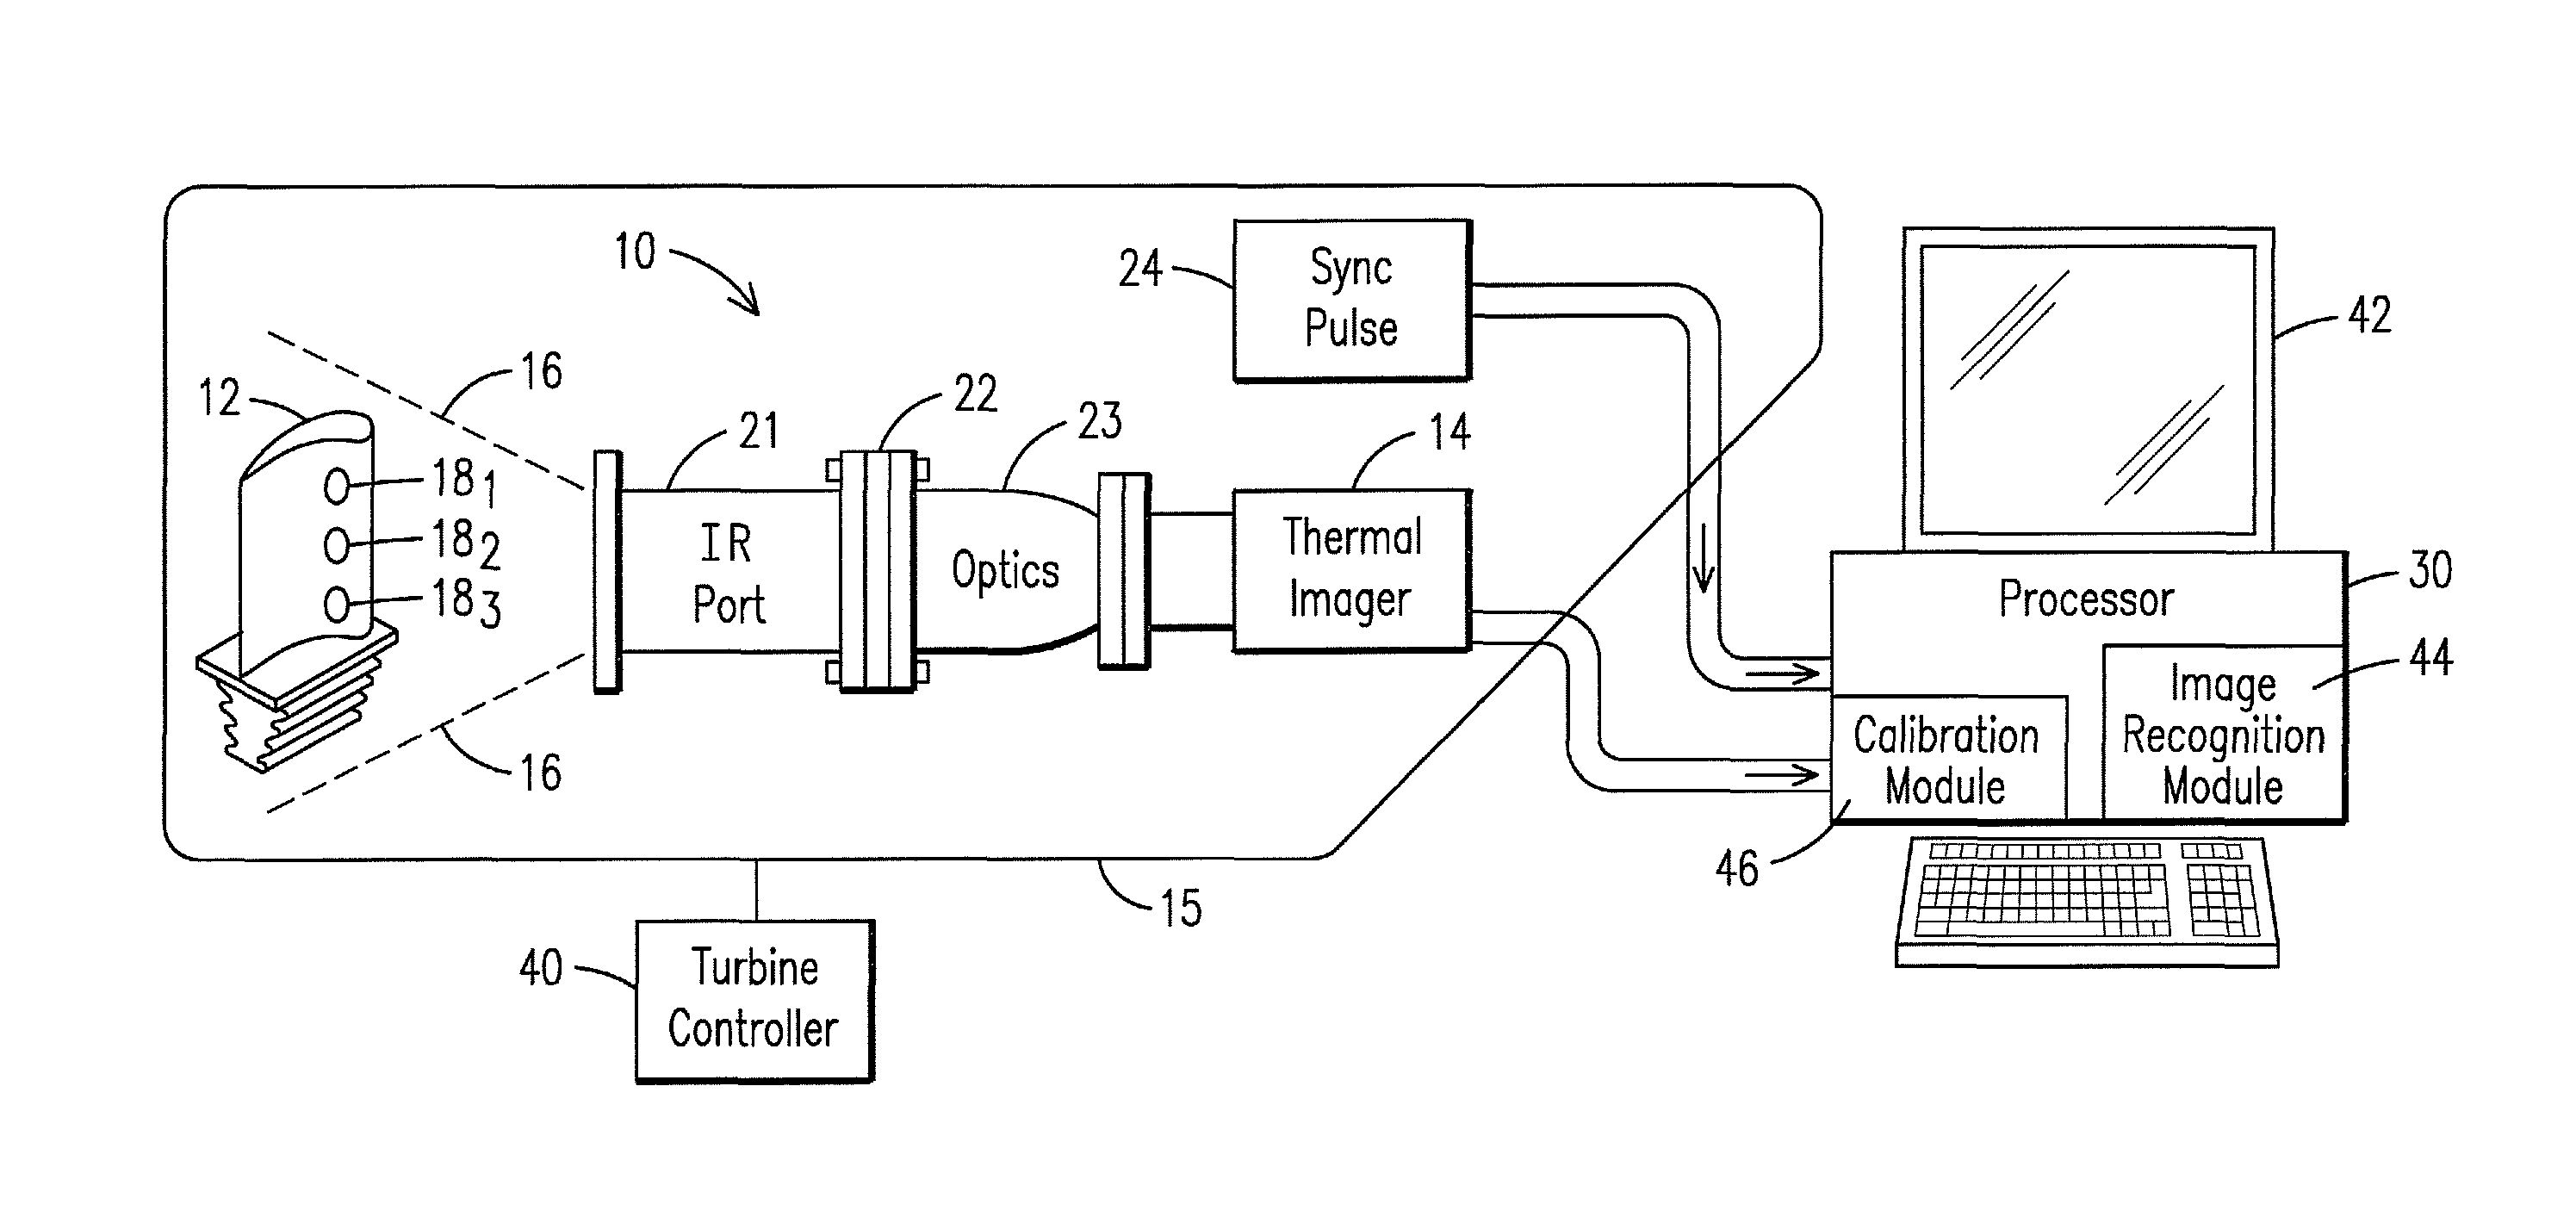 Apparatus and method for temperature mapping a turbine component in a high temperature combustion environment